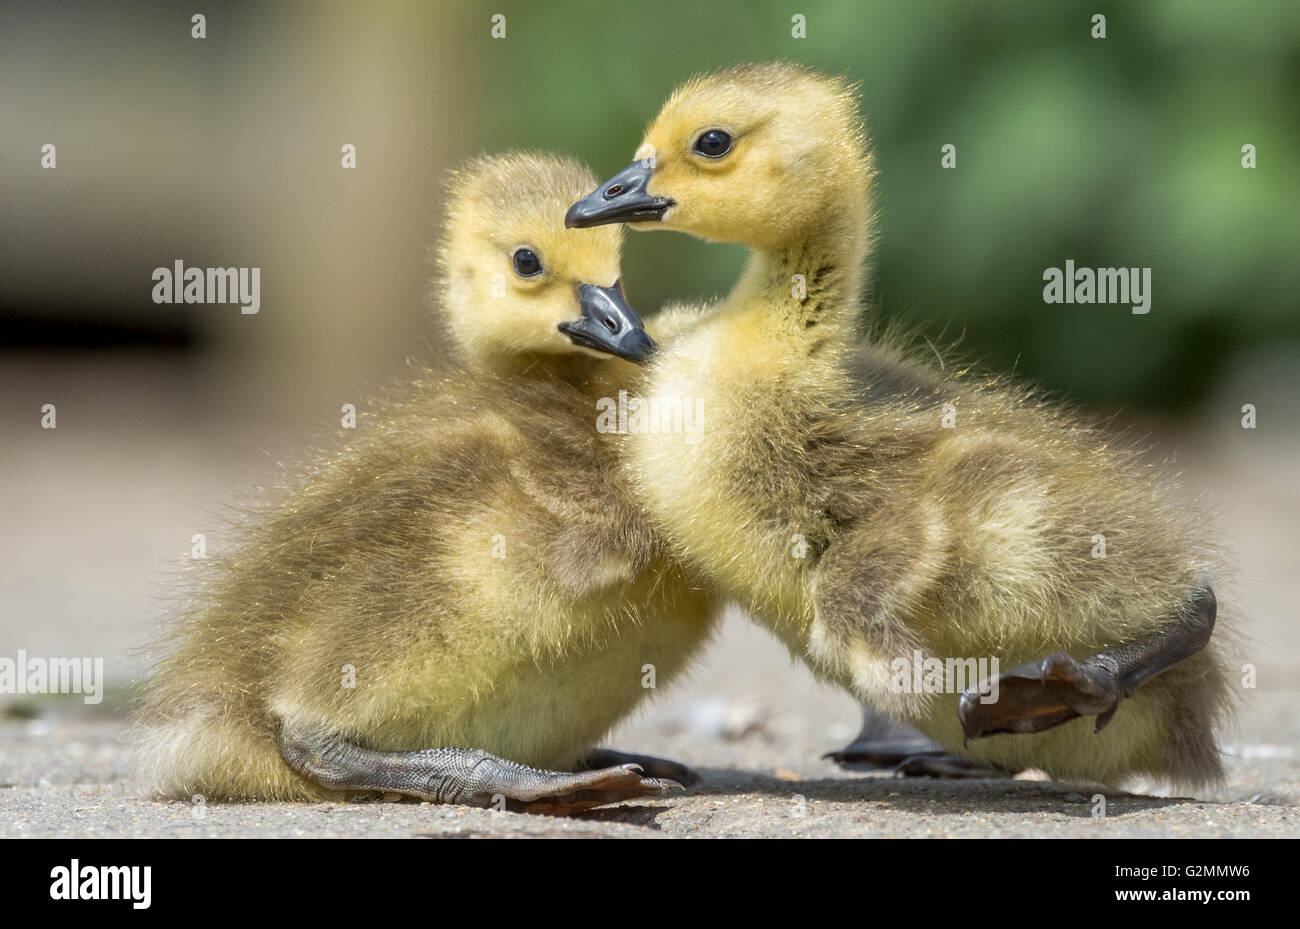 Canadian Geese chicks with their yellow fluffy feather down. Stock Photo